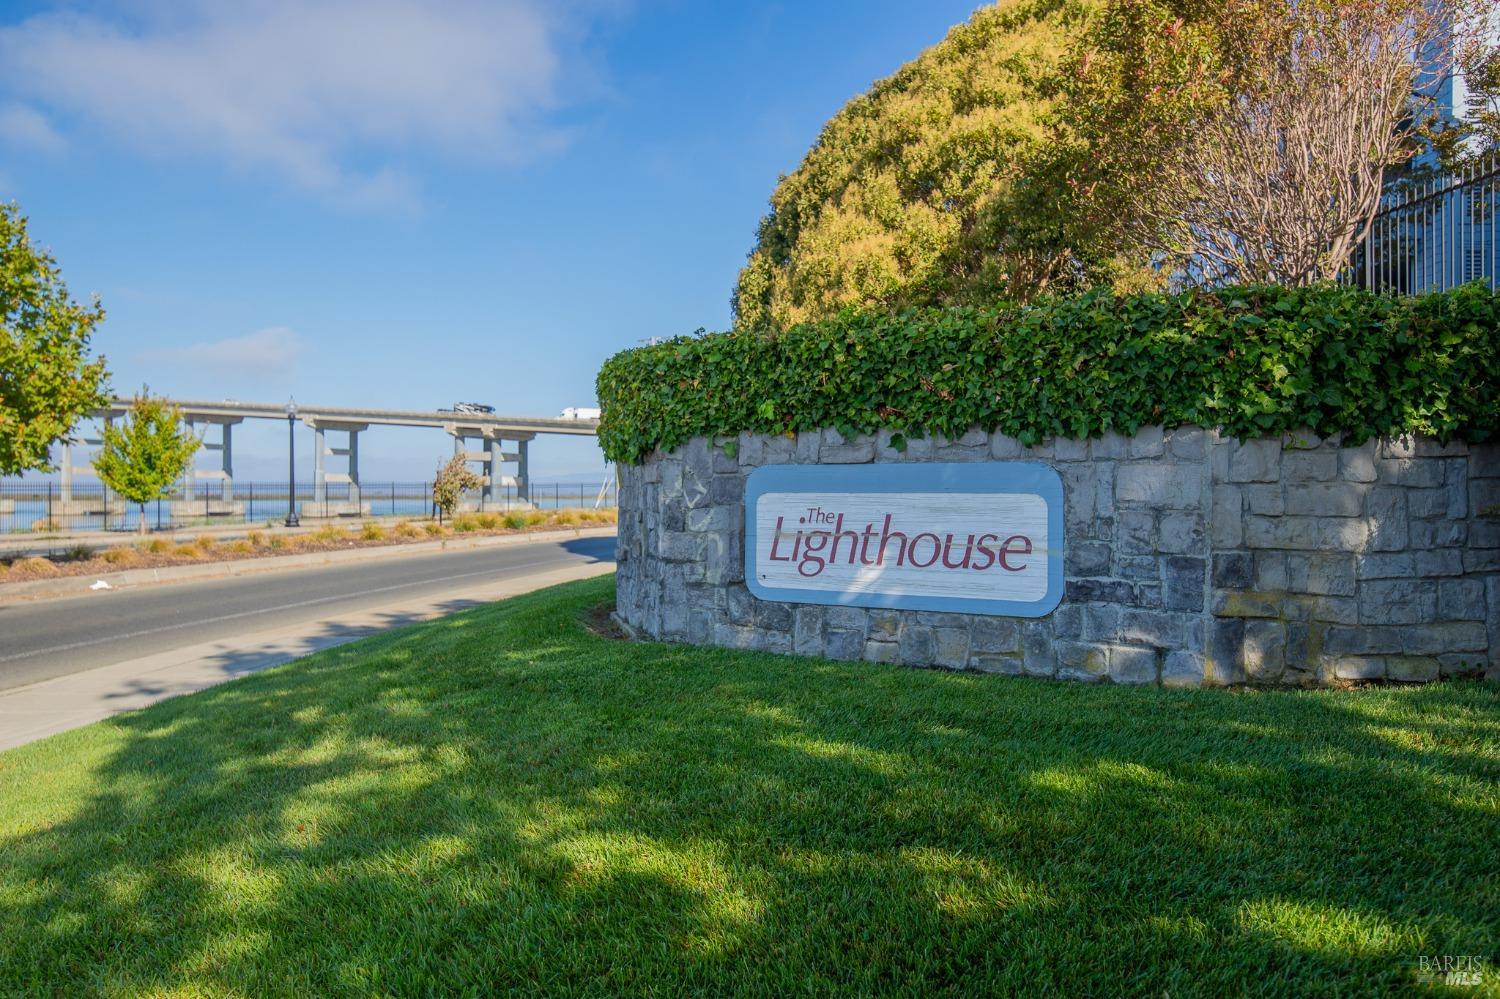 Photo of 221 Lighthouse Dr #221 in Vallejo, CA